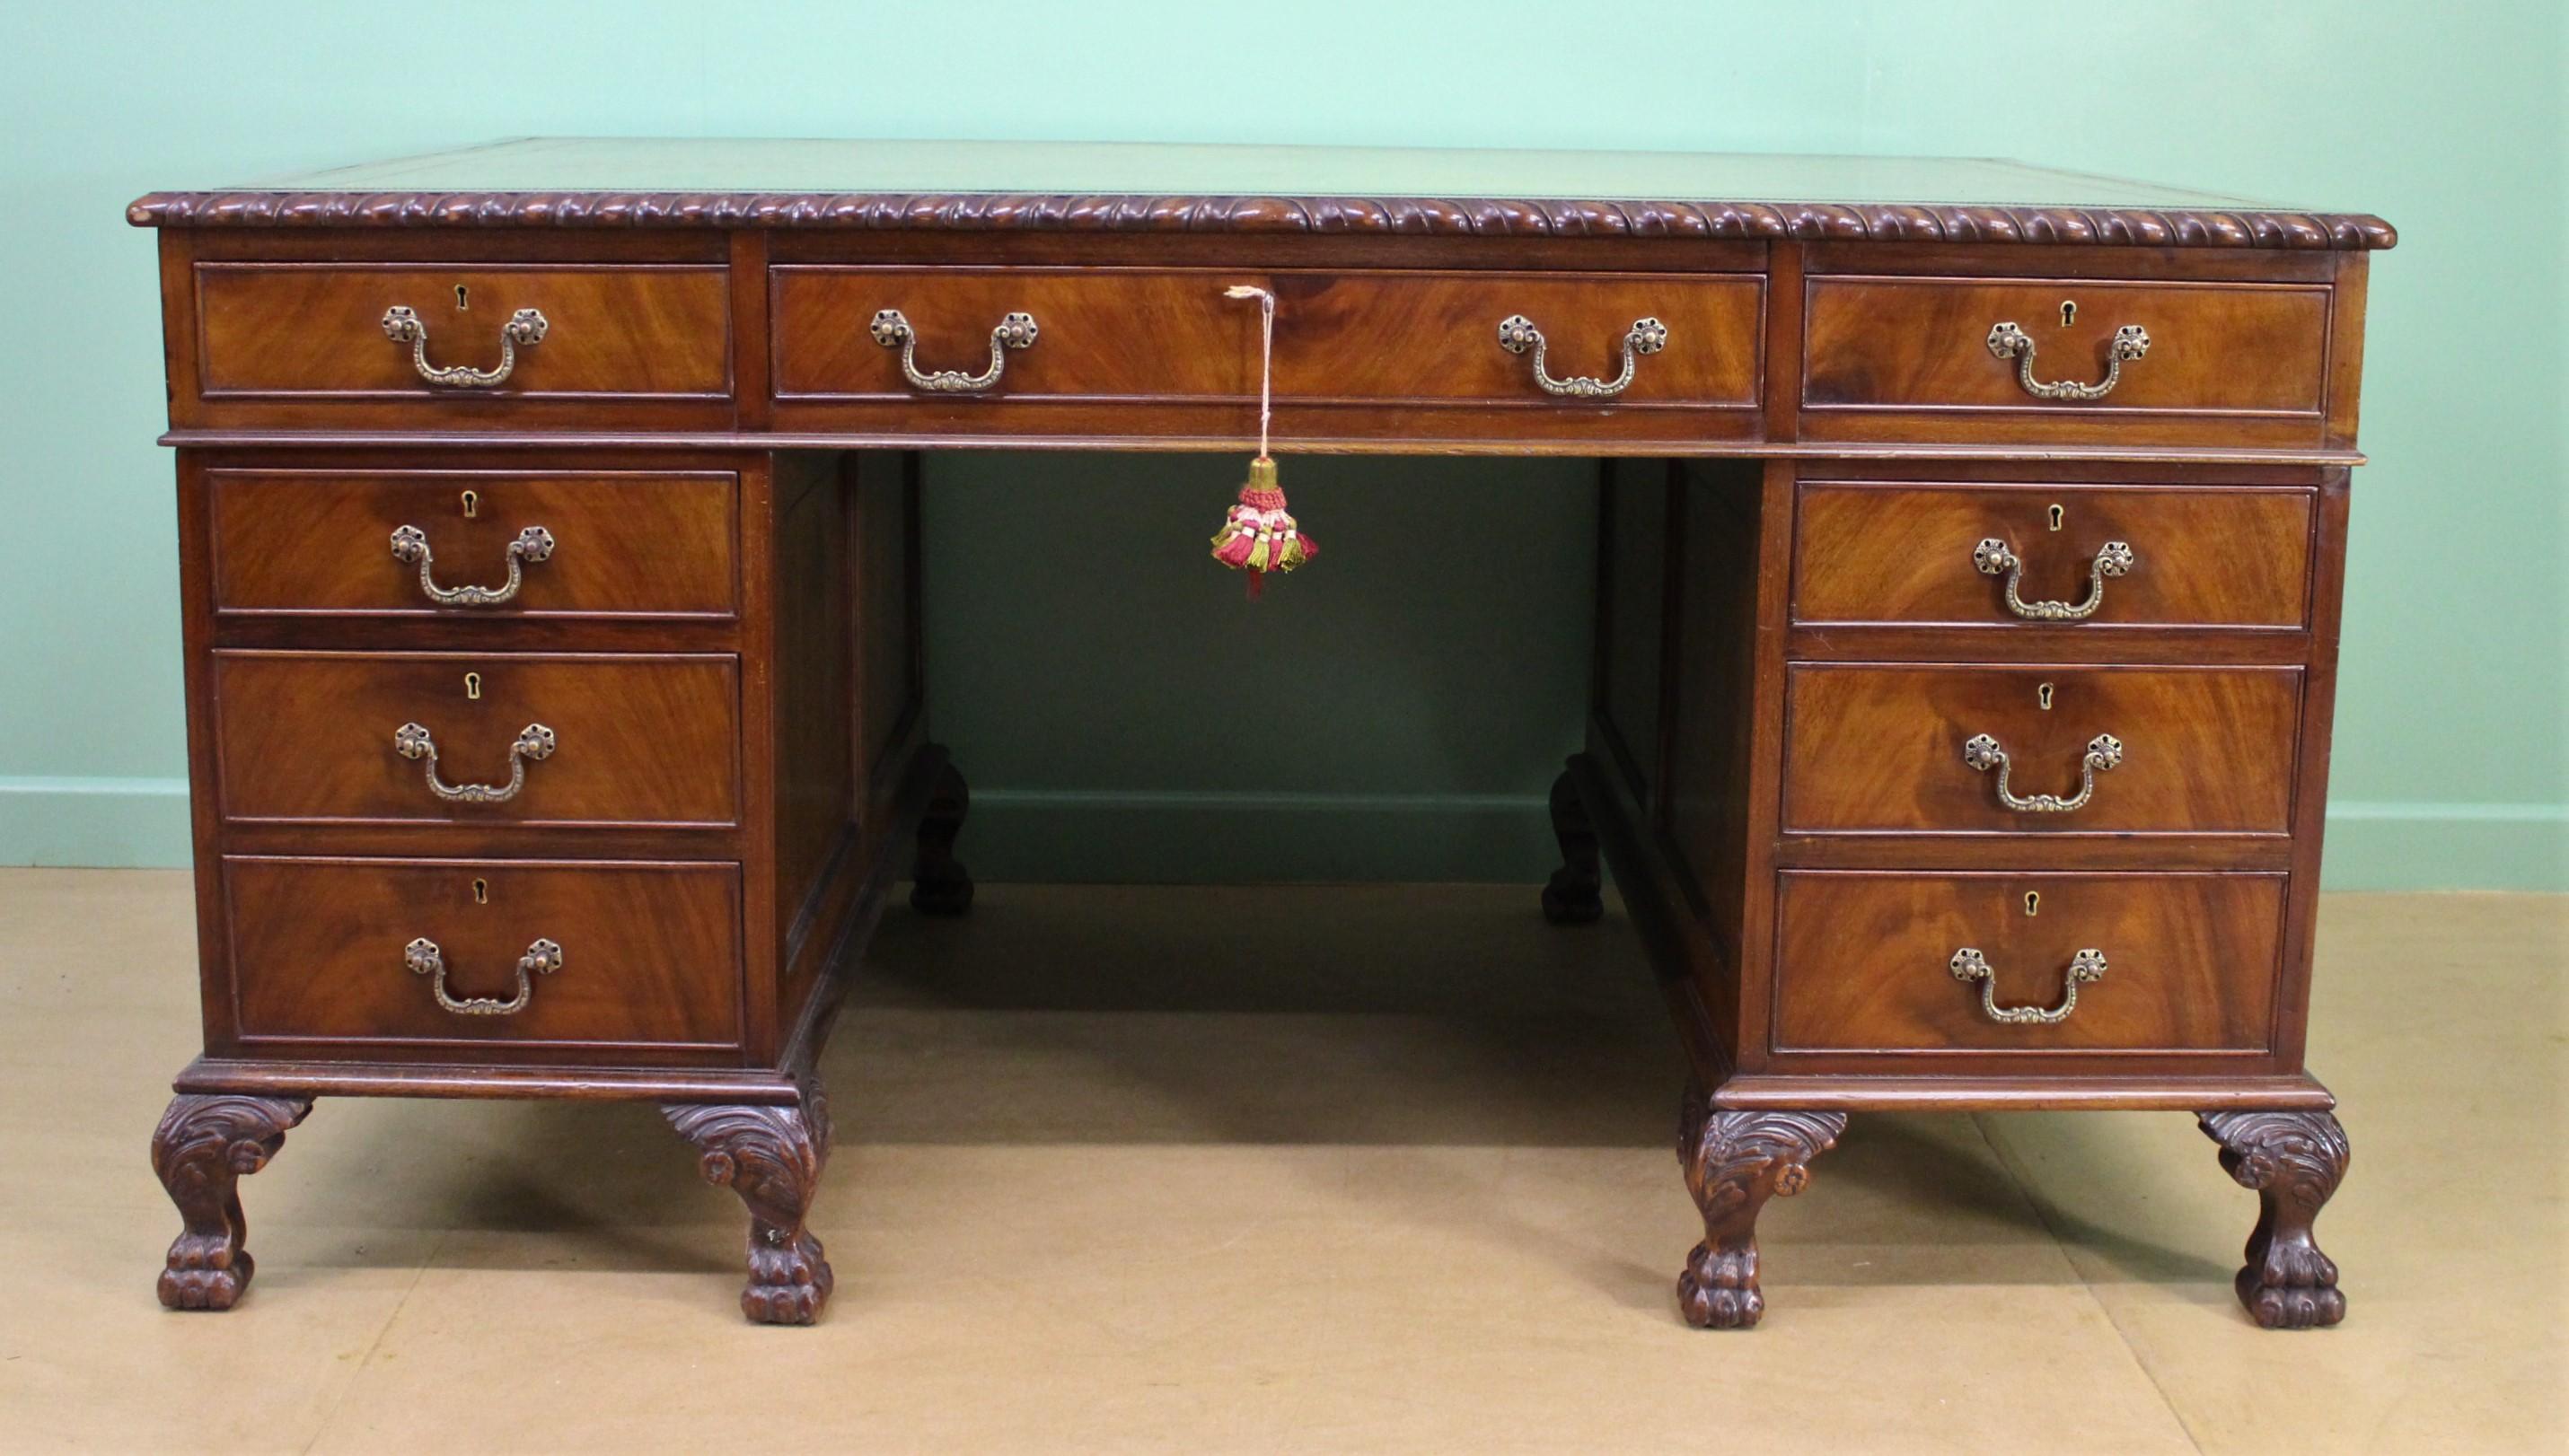 This marvellous and substantial Edwardian walnut partners desk is supported on 8 carved paw feet and features the original brass pull handles. The desk has a lovely colored green leather tooled top with a gadrooned mahogany edge. One side features 4